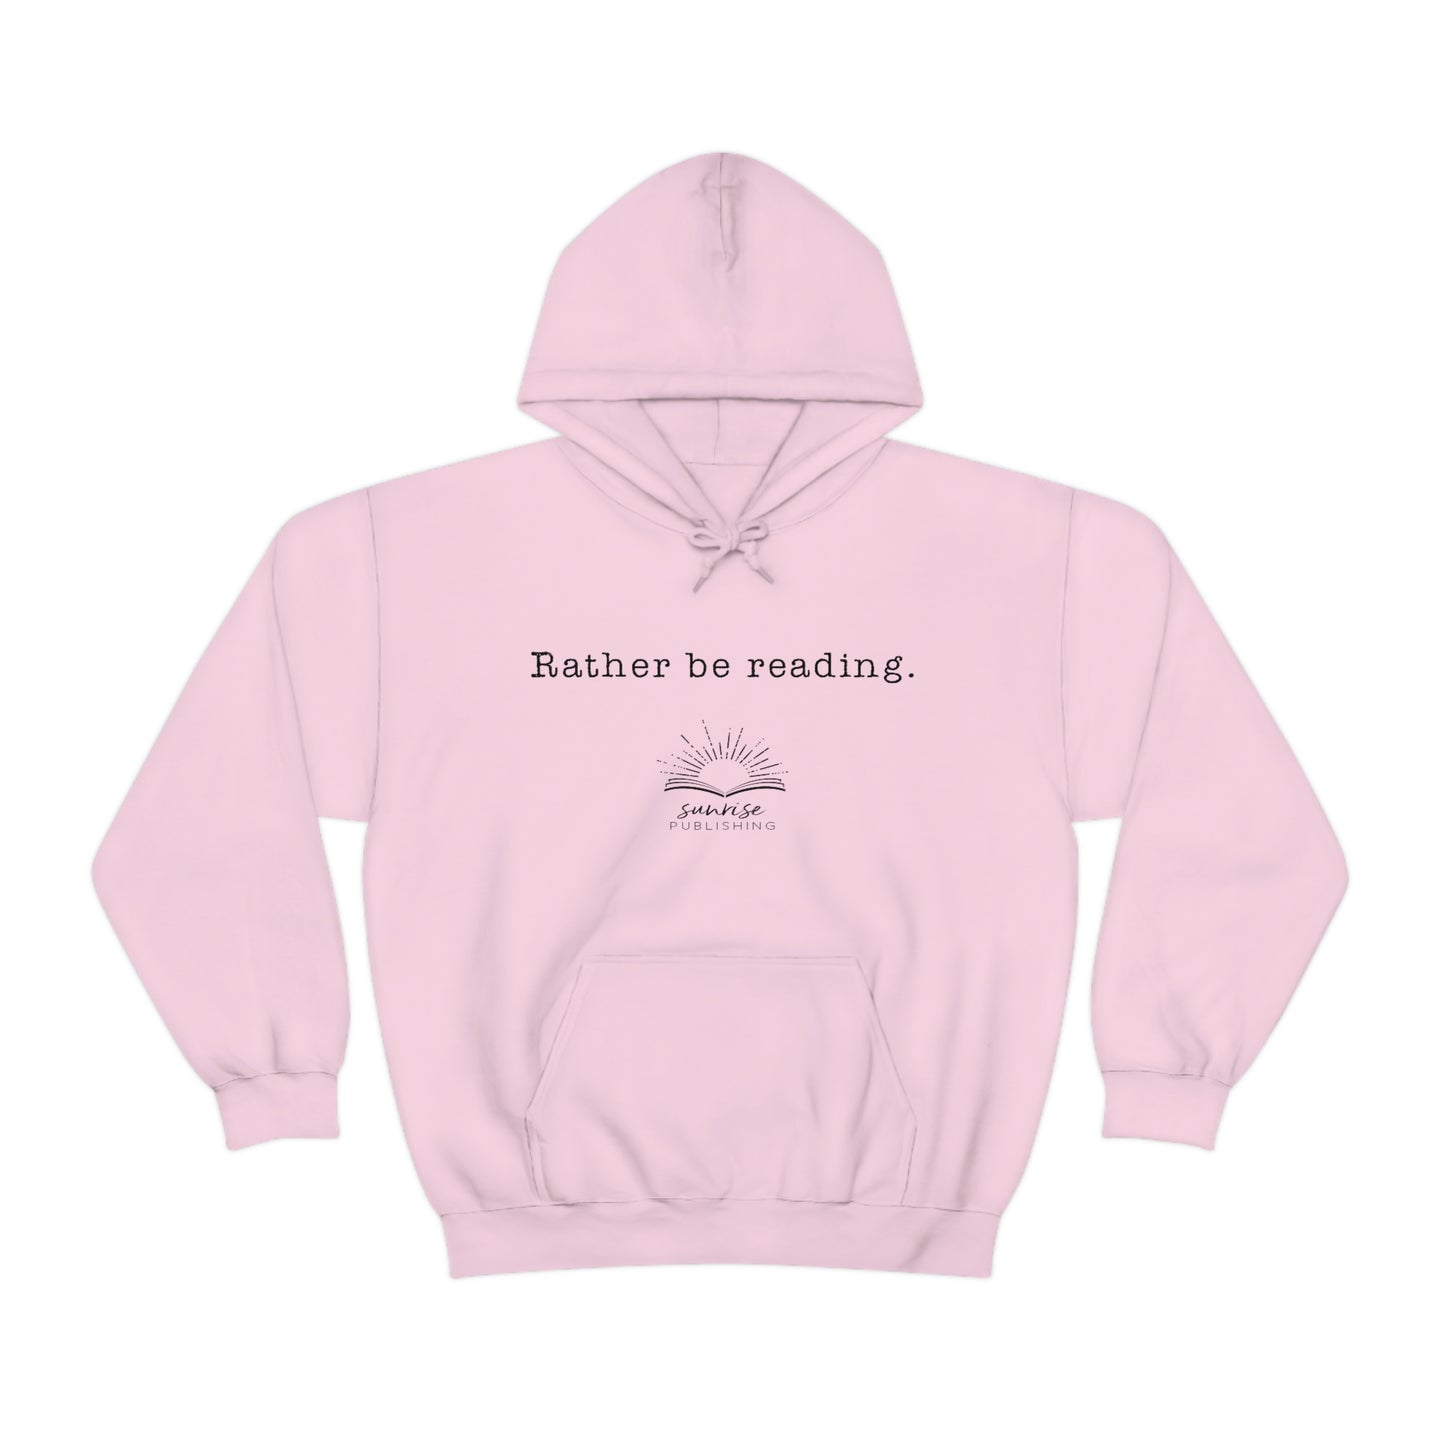 "Rather be Reading." - Heavy Blend™ Hooded Sweatshirt